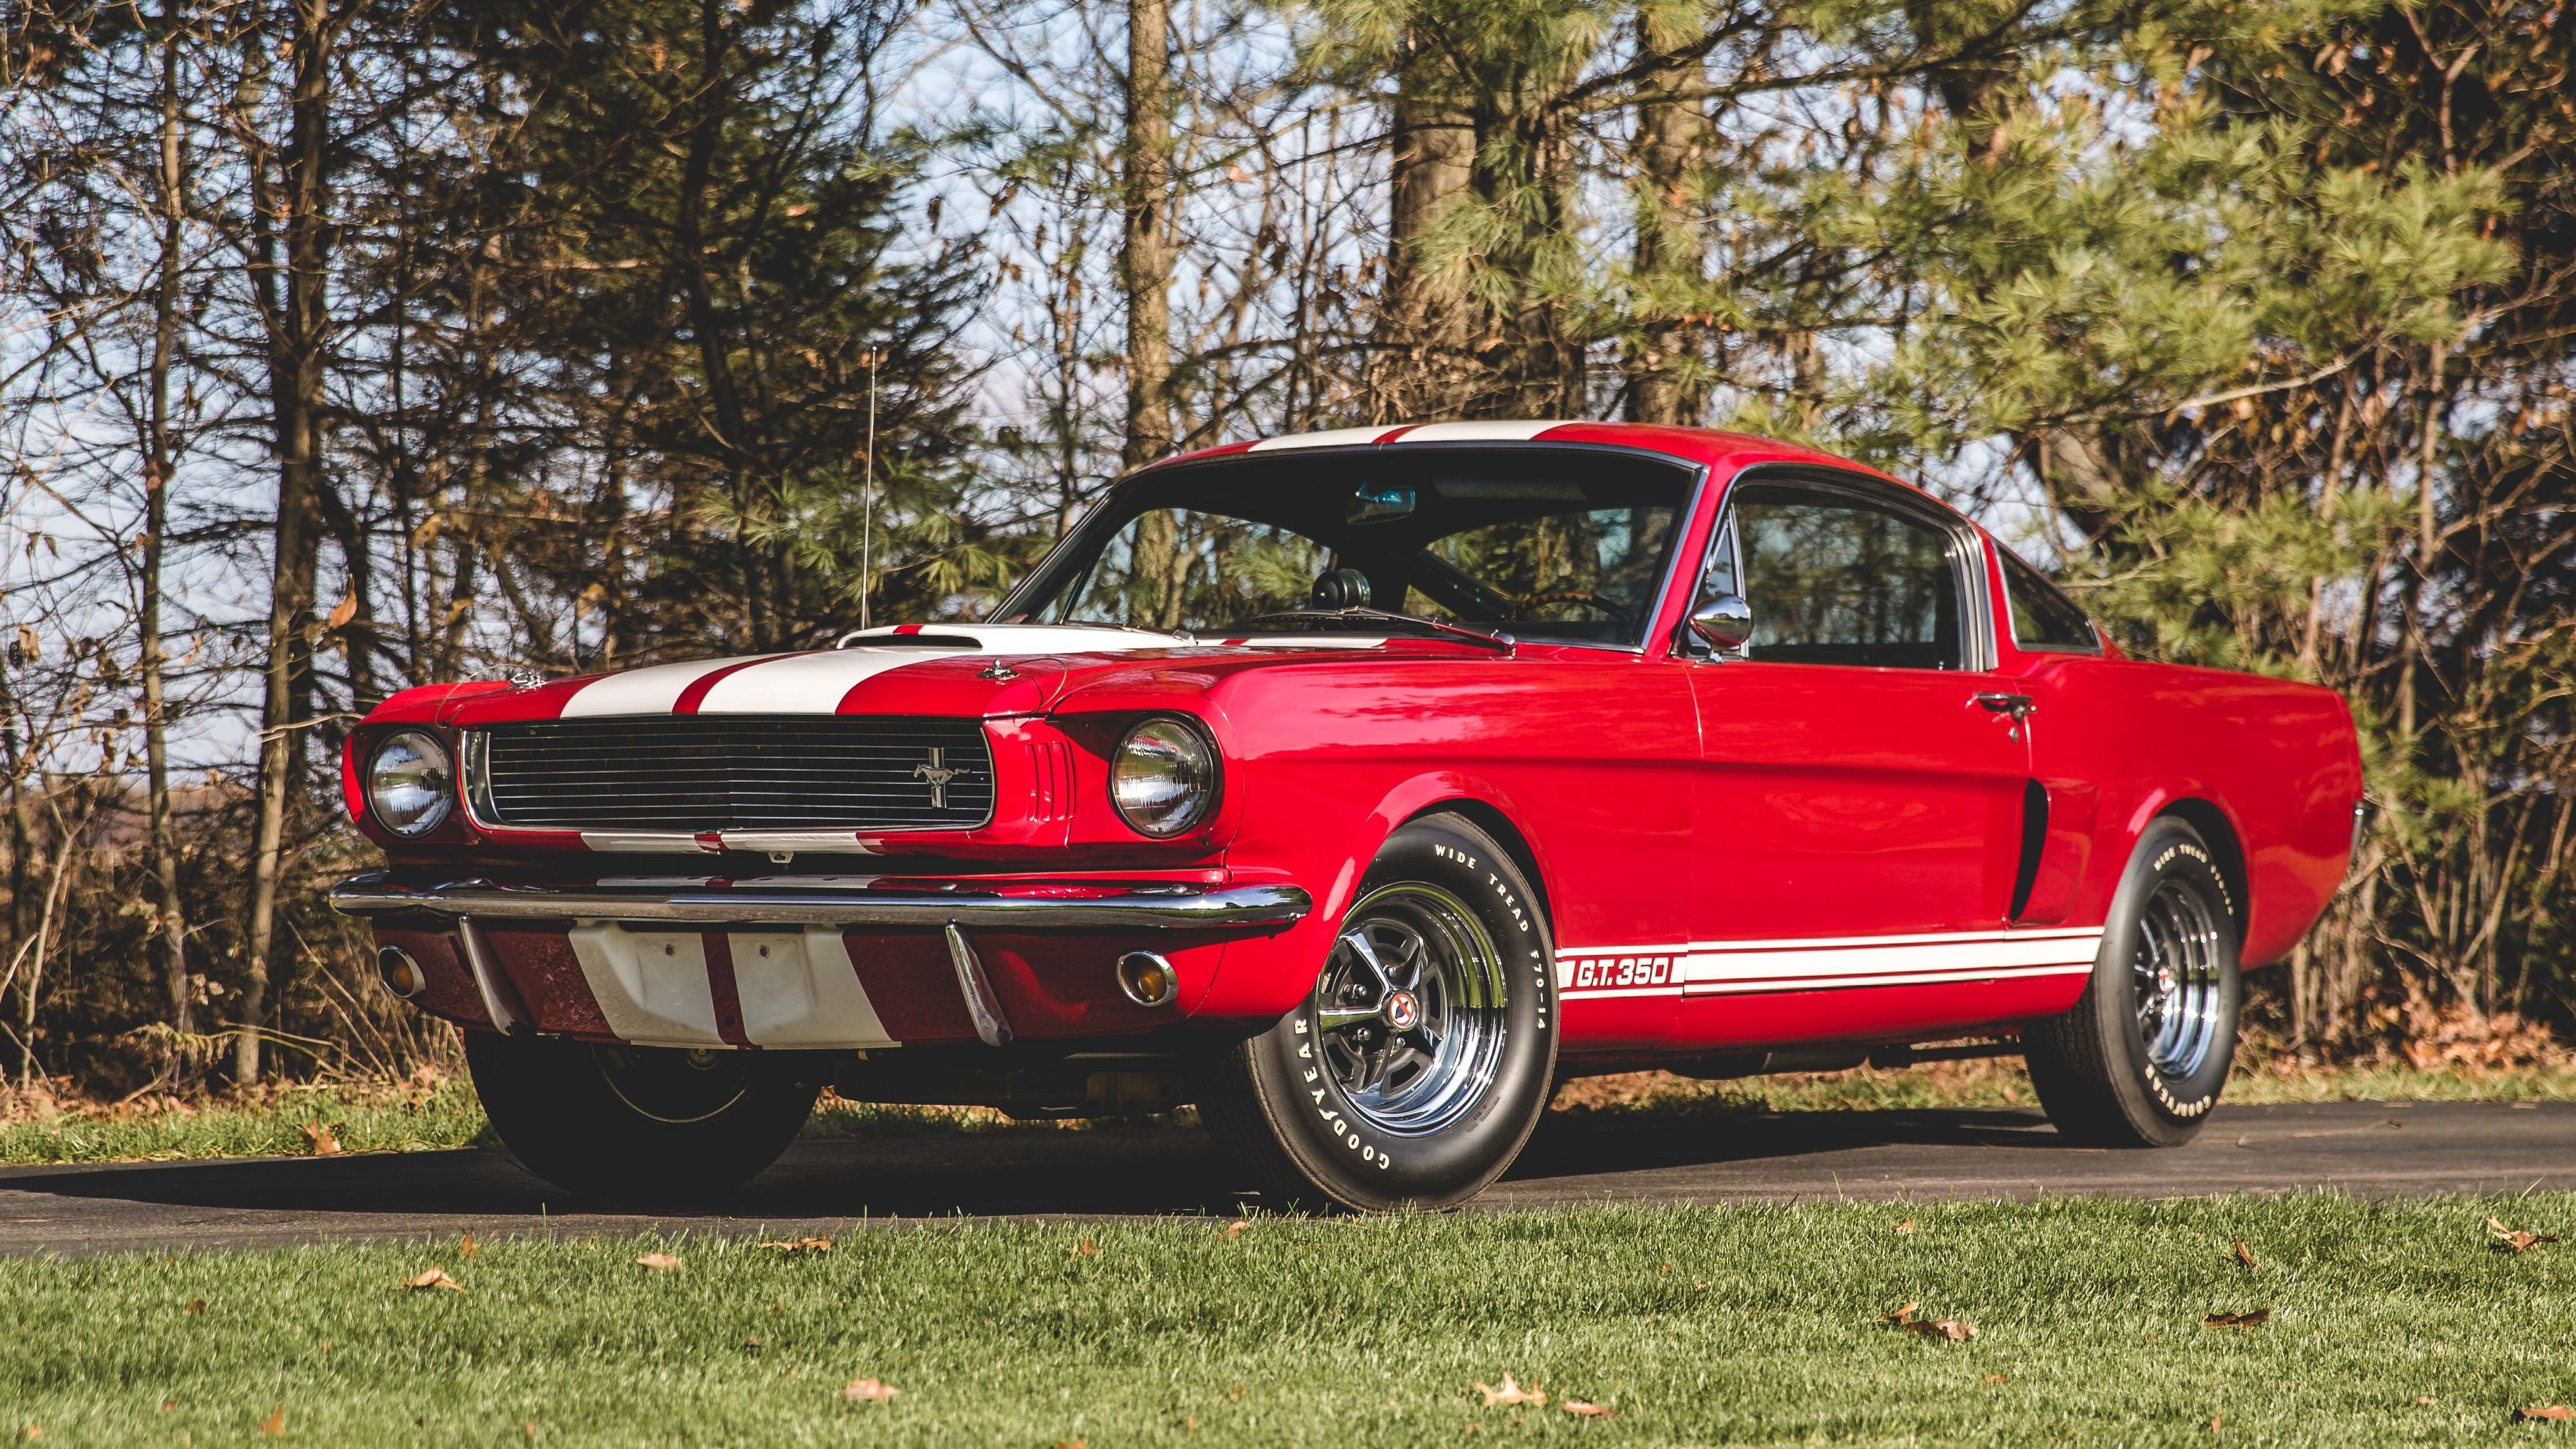 Ford Shelby Gt350 Fastback Muscle Car 4468x2513